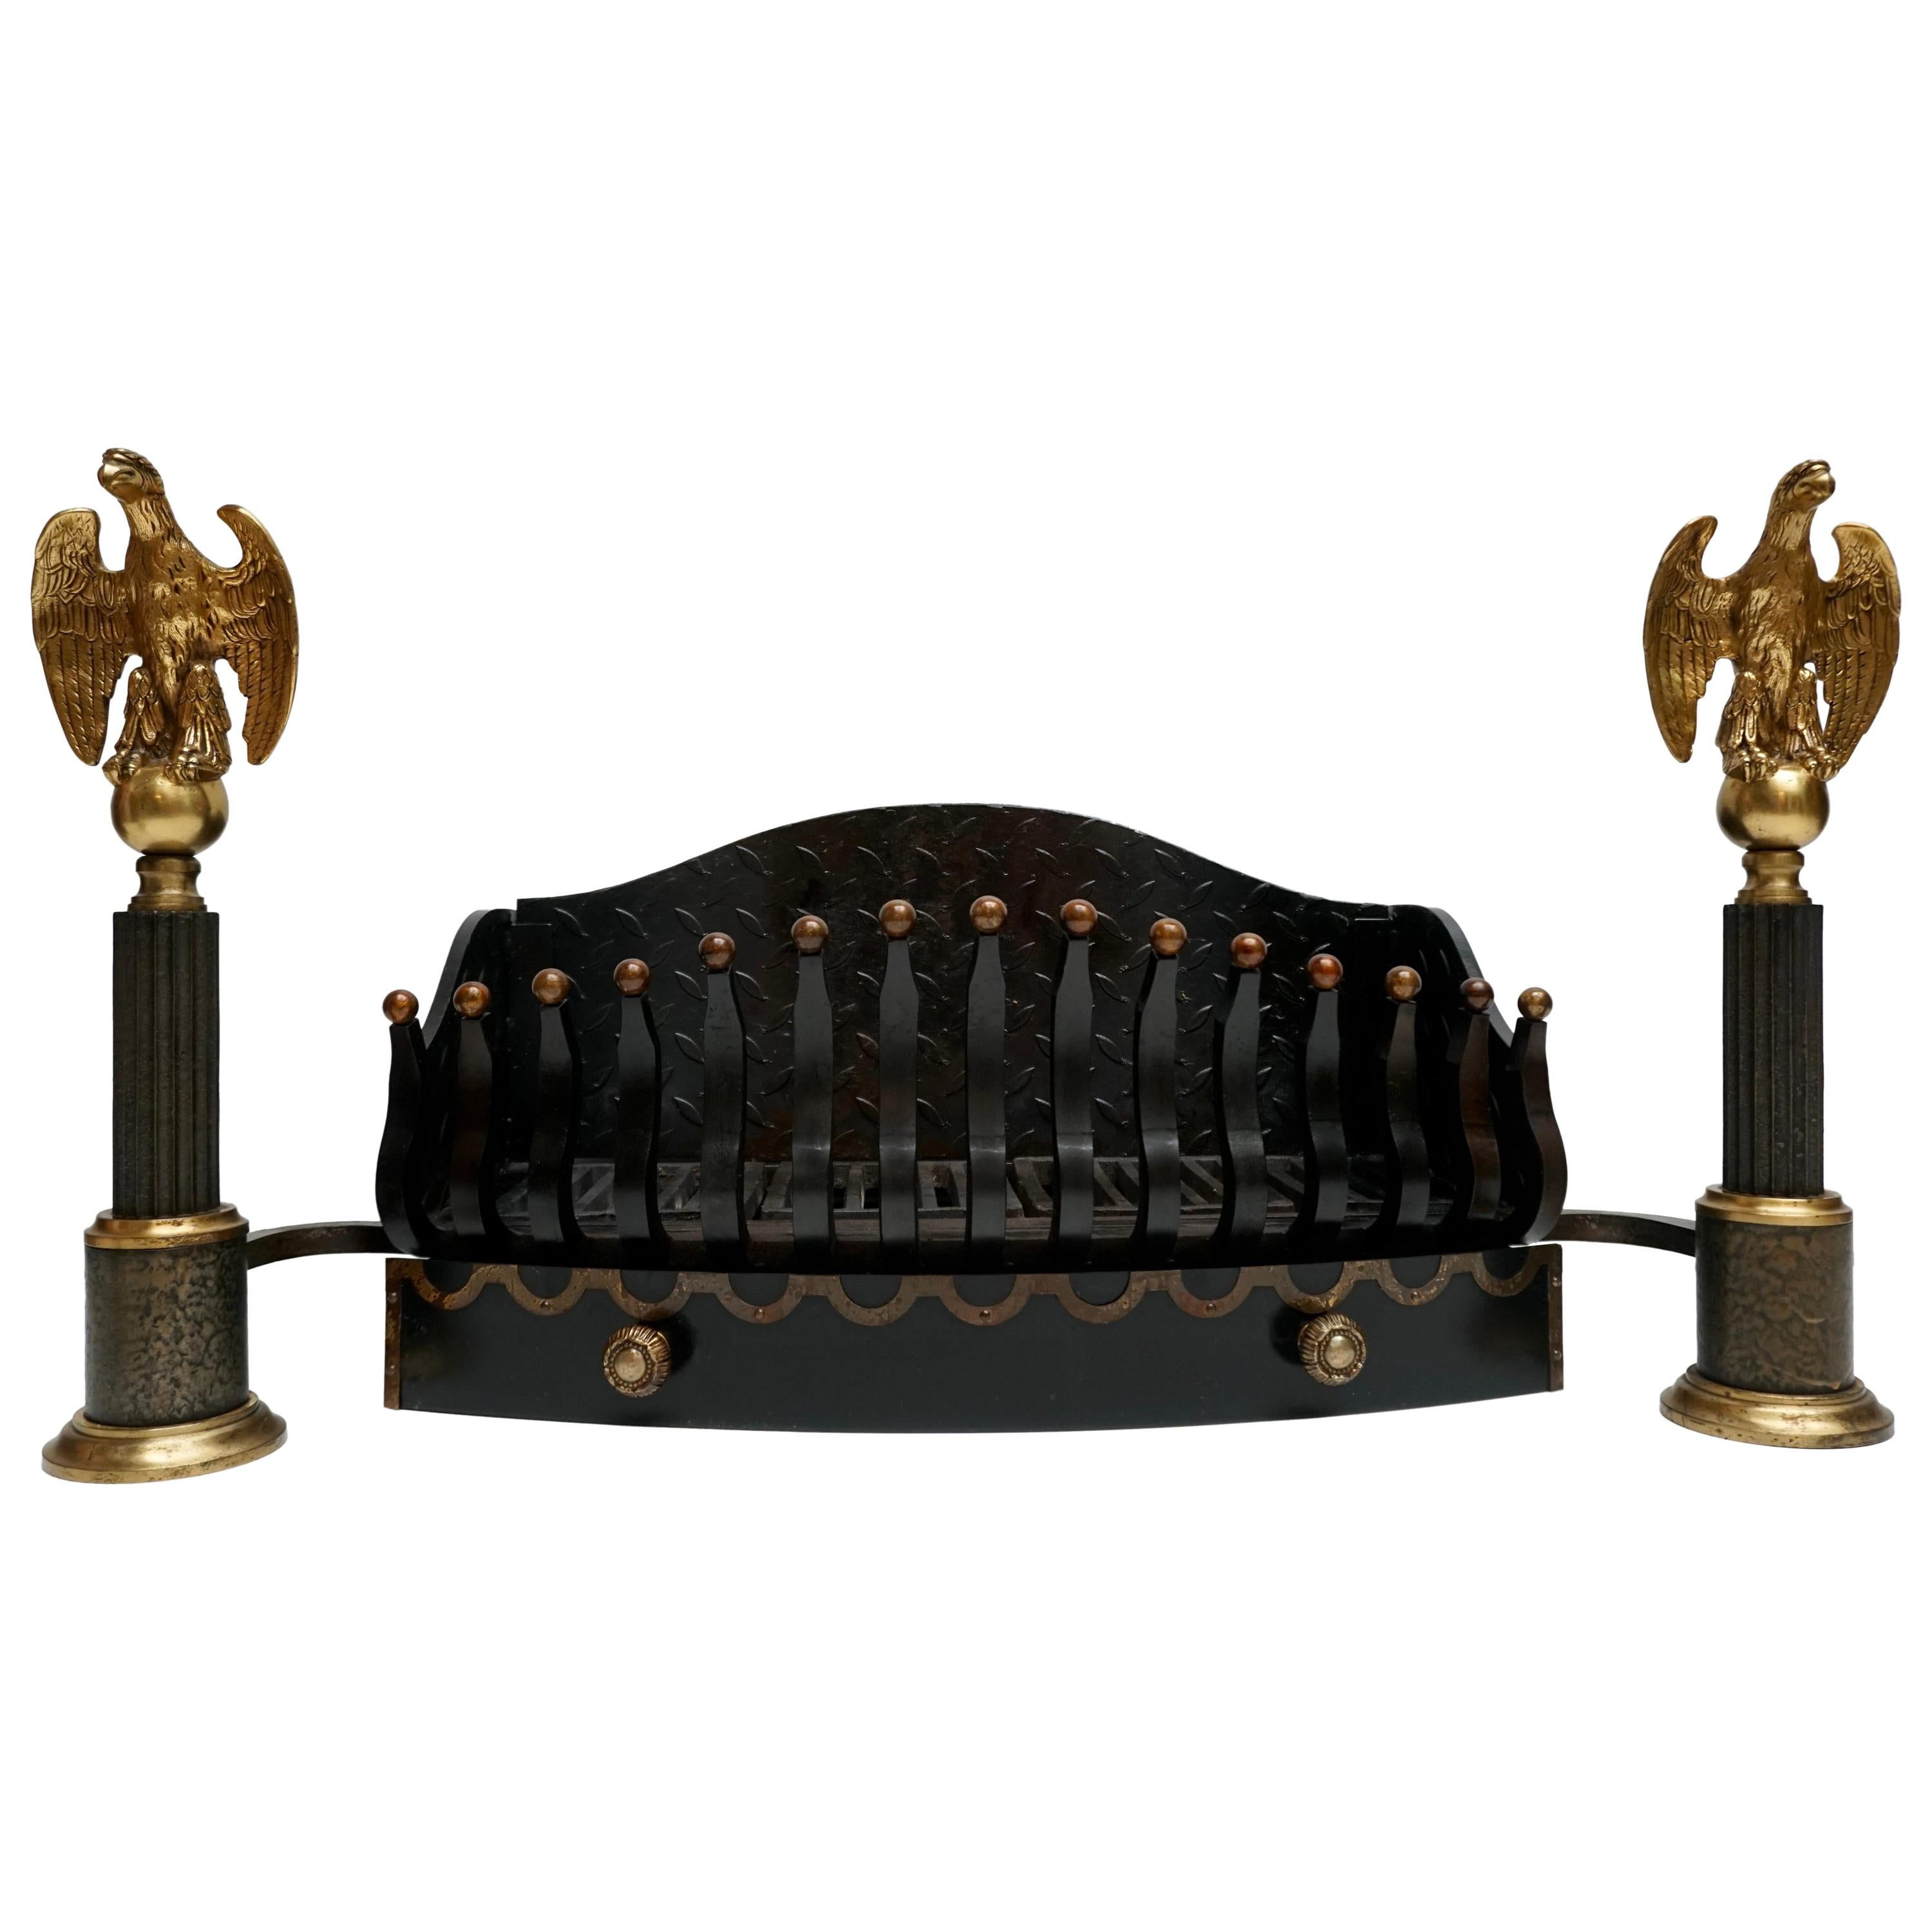 Monumental Late 19th Century Cast Iron Fire Grates Basket with Bronze Eagles